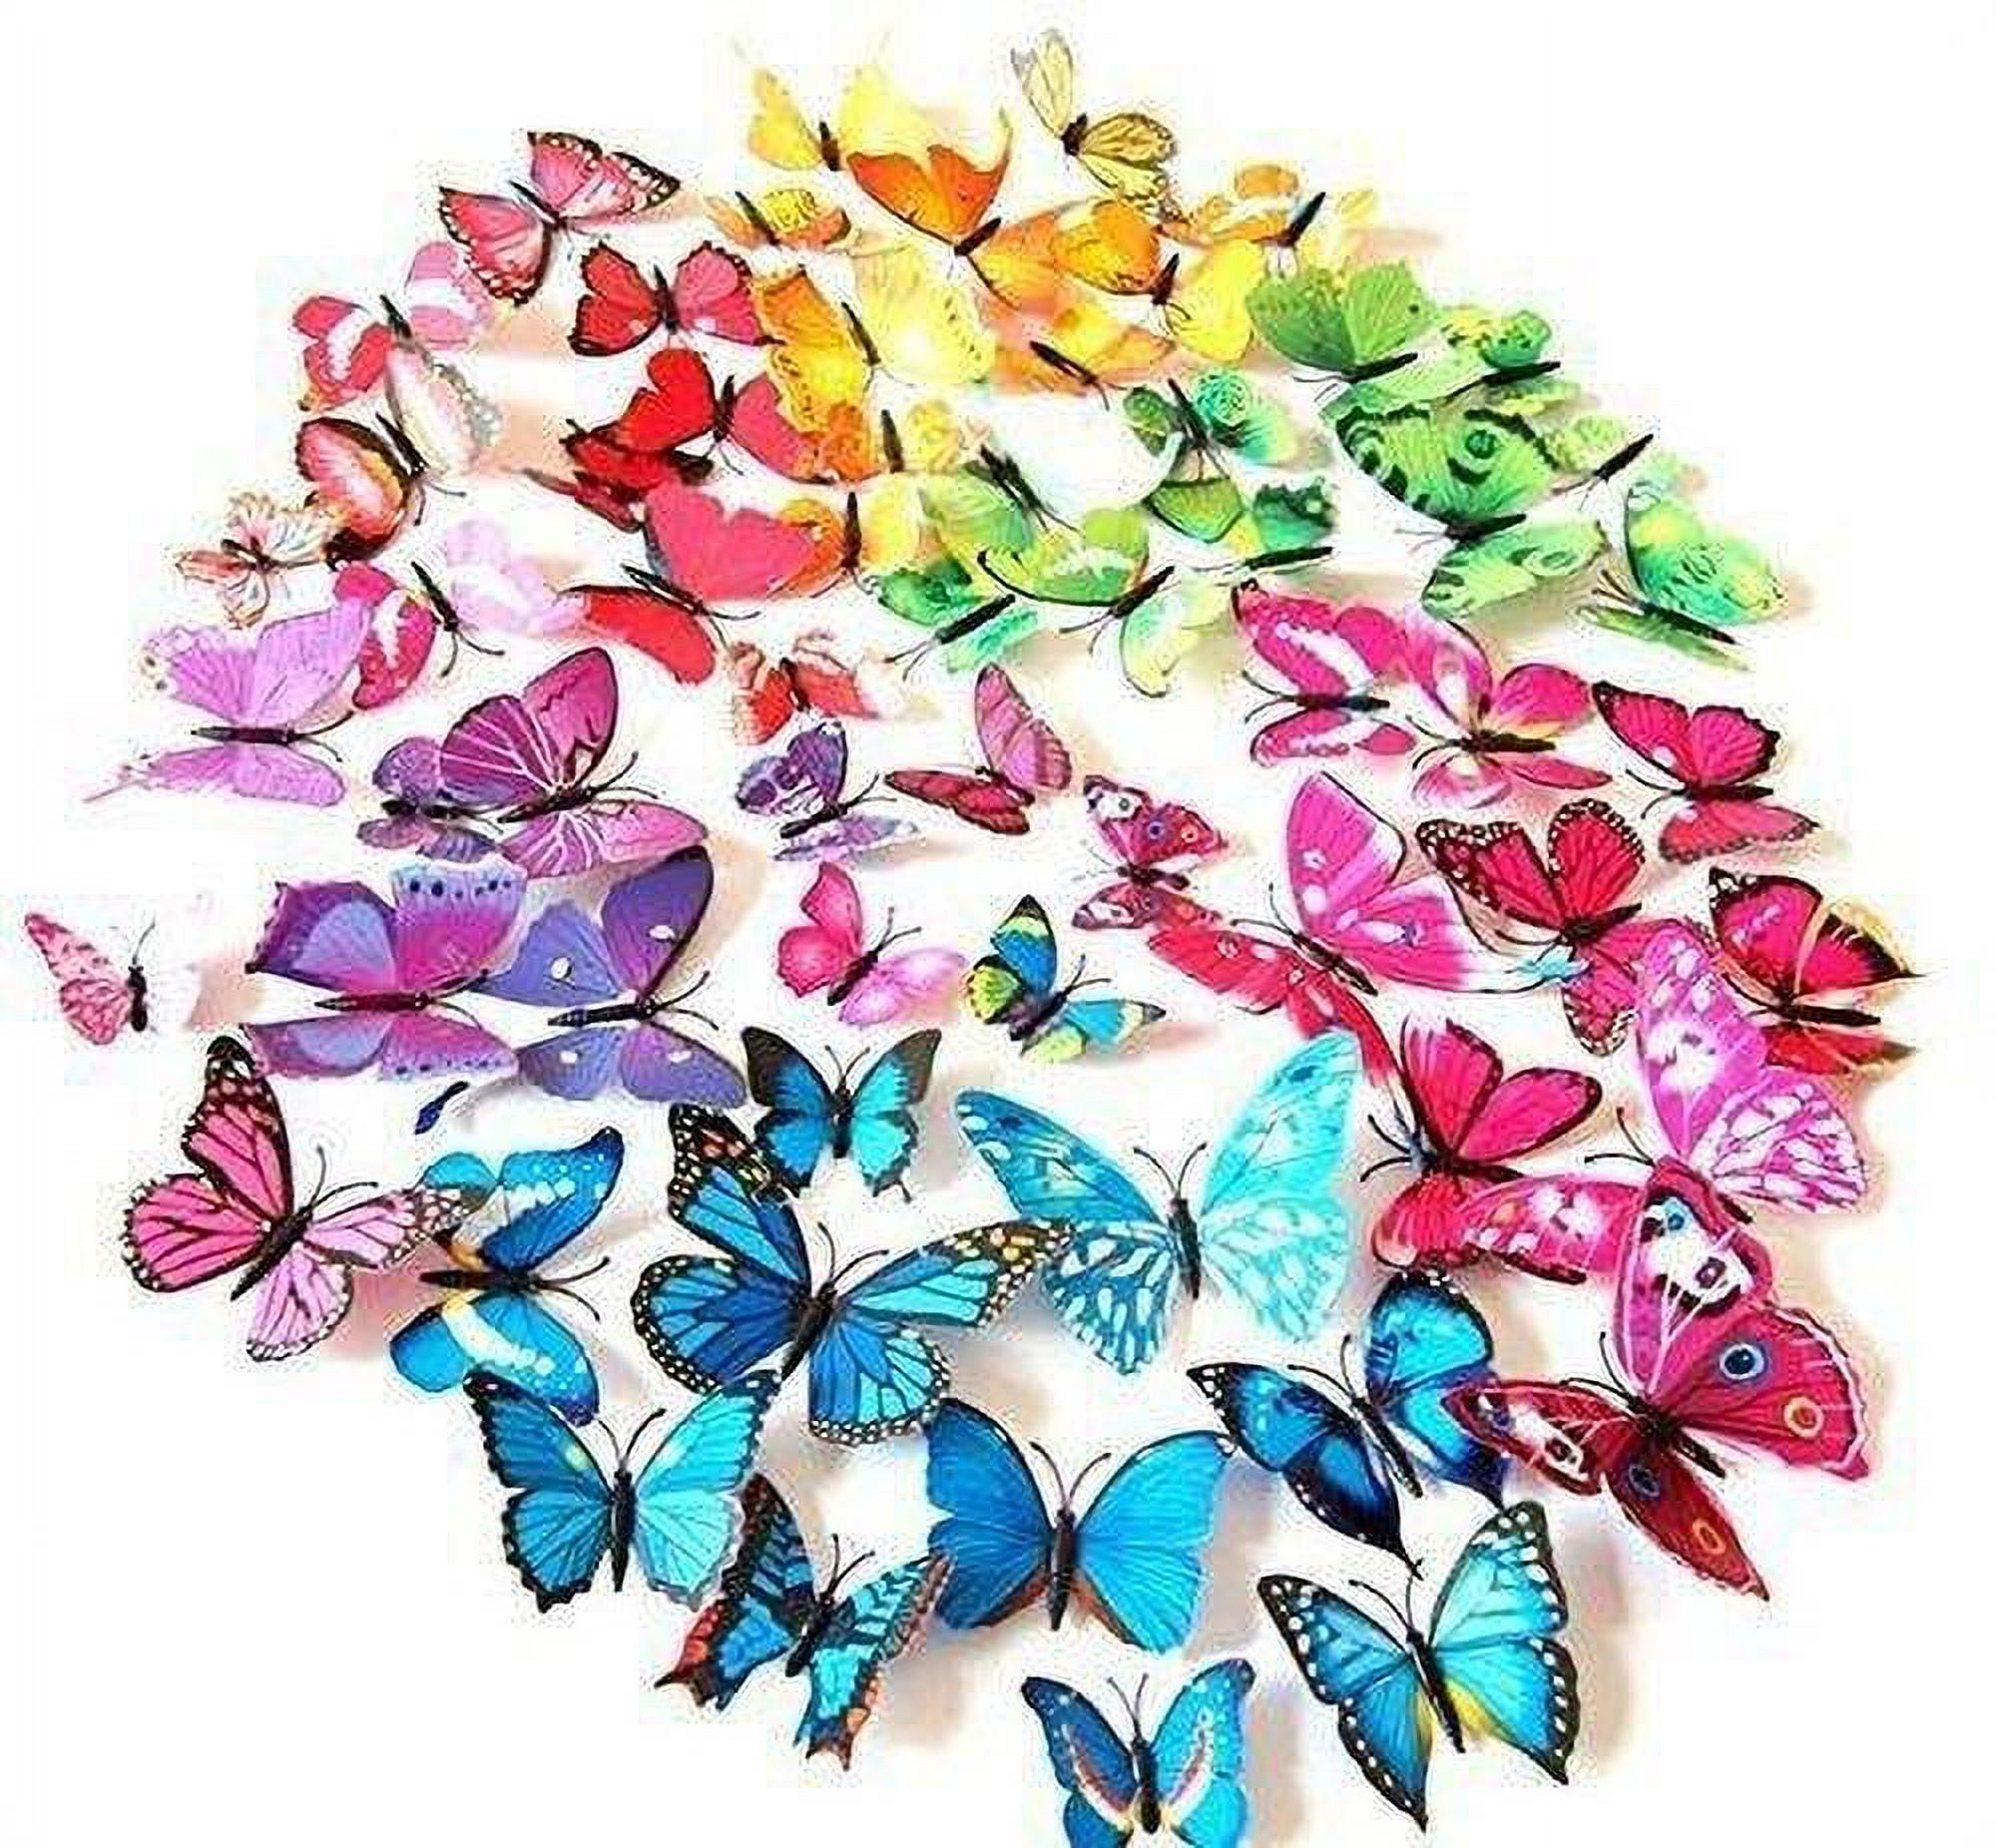 Travelwant 36Packs Butterfly Wall Decals - 3D Butterflies Decor for Wall Removable Mural Stickers Home Decoration Kids Room Bedroom Decor, Size: 14